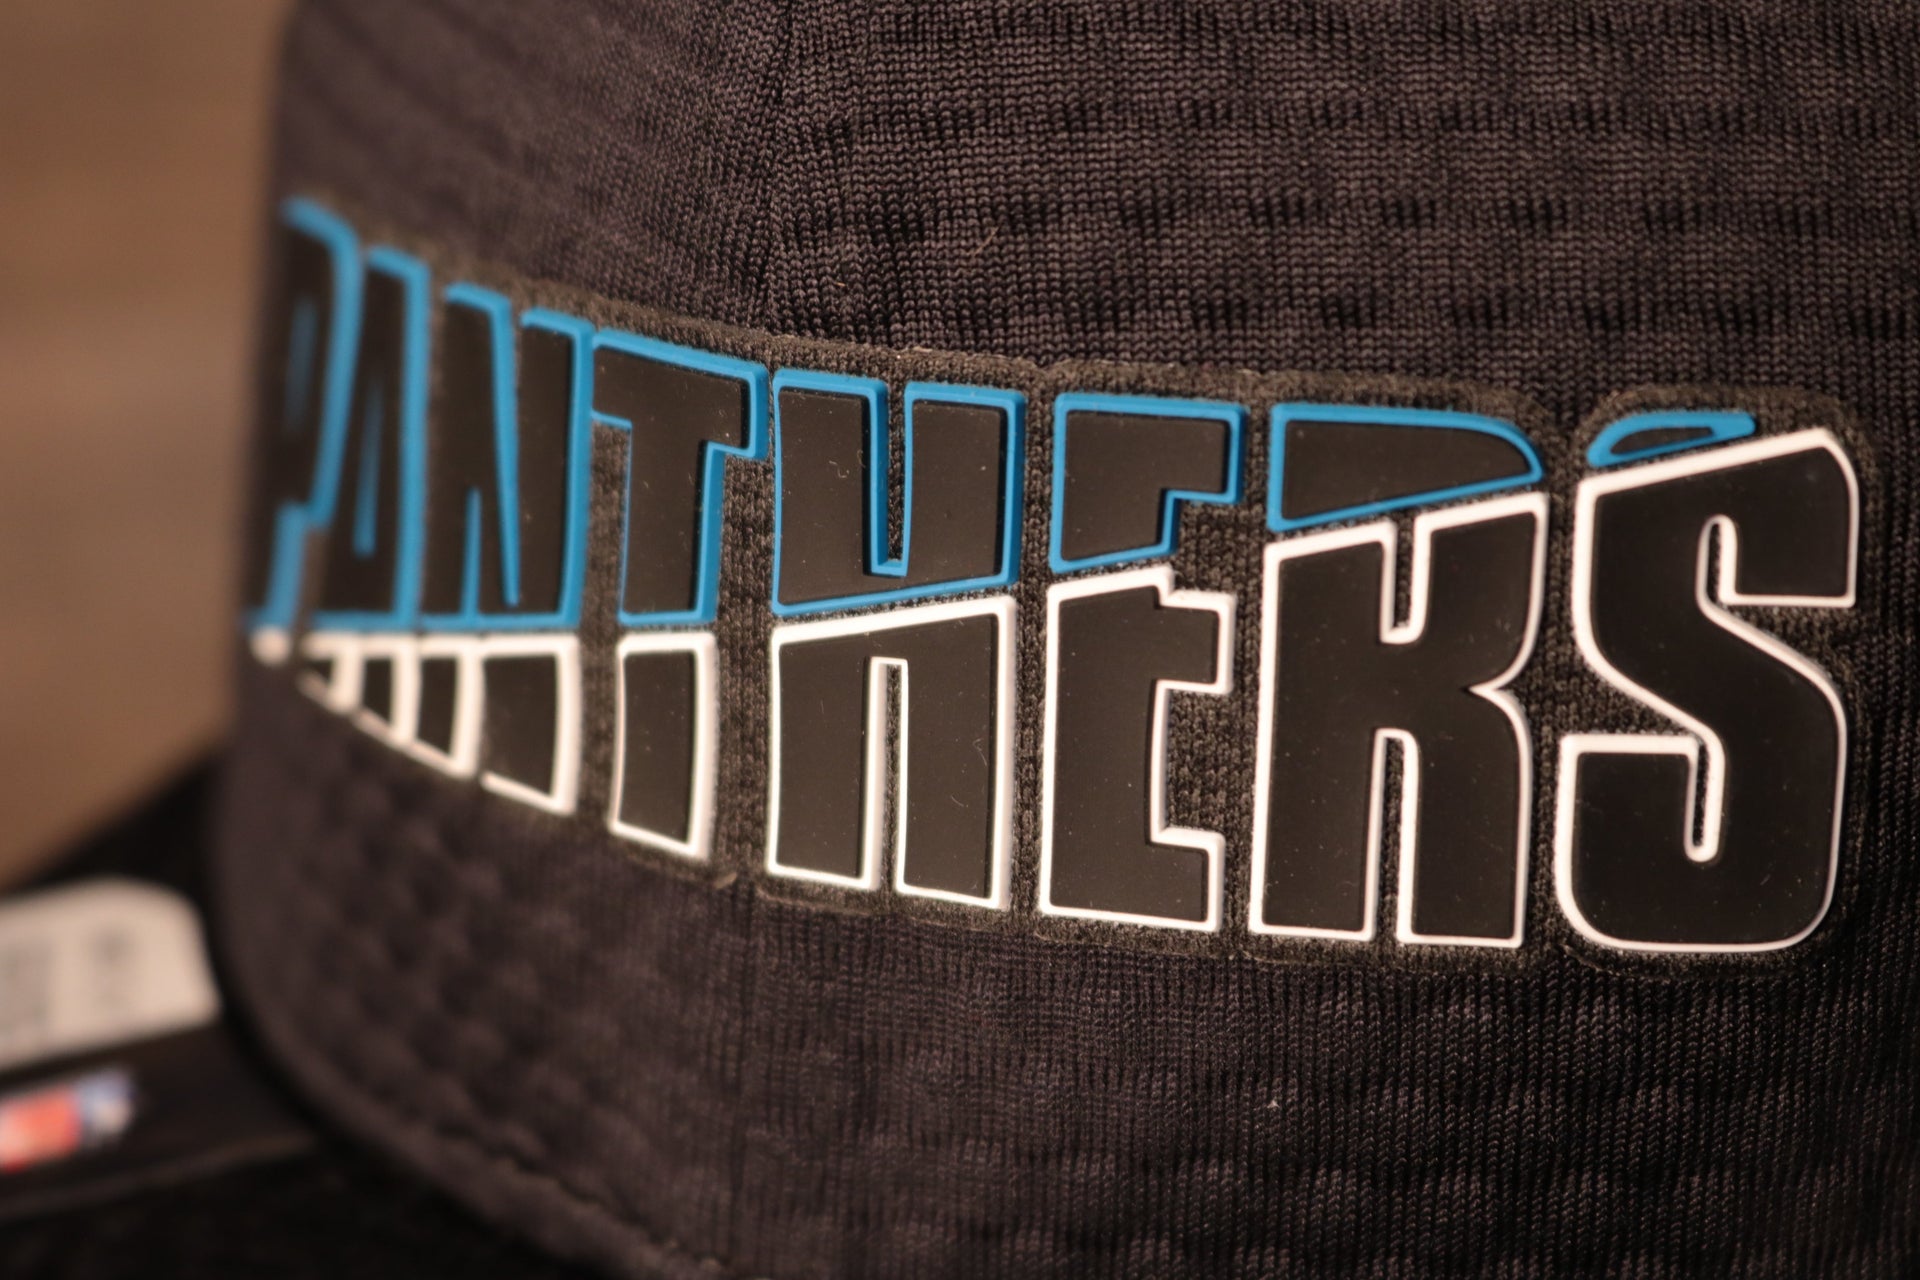 Panthers 2020 Training Camp Snapback Hat | Carolina Panthers 2020 On-Field Black Training Camp Snap Cap the team name on the front is half white and half teal